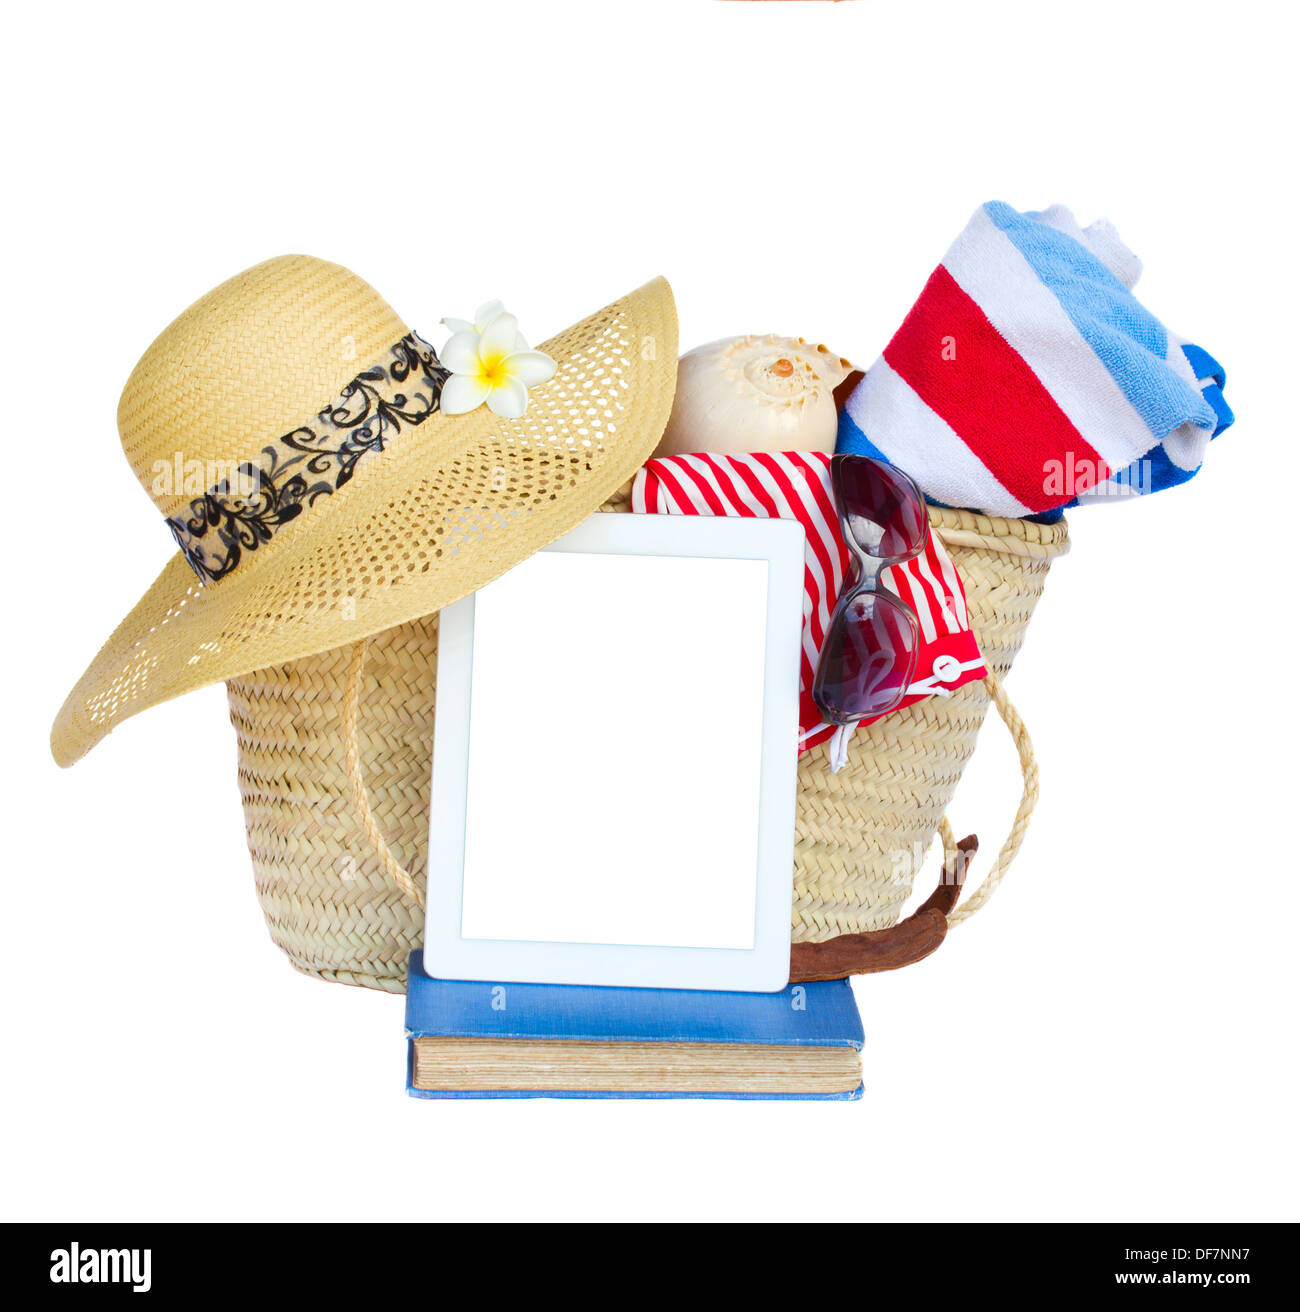 sunbathing accessories in basket with tablet Stock Photo